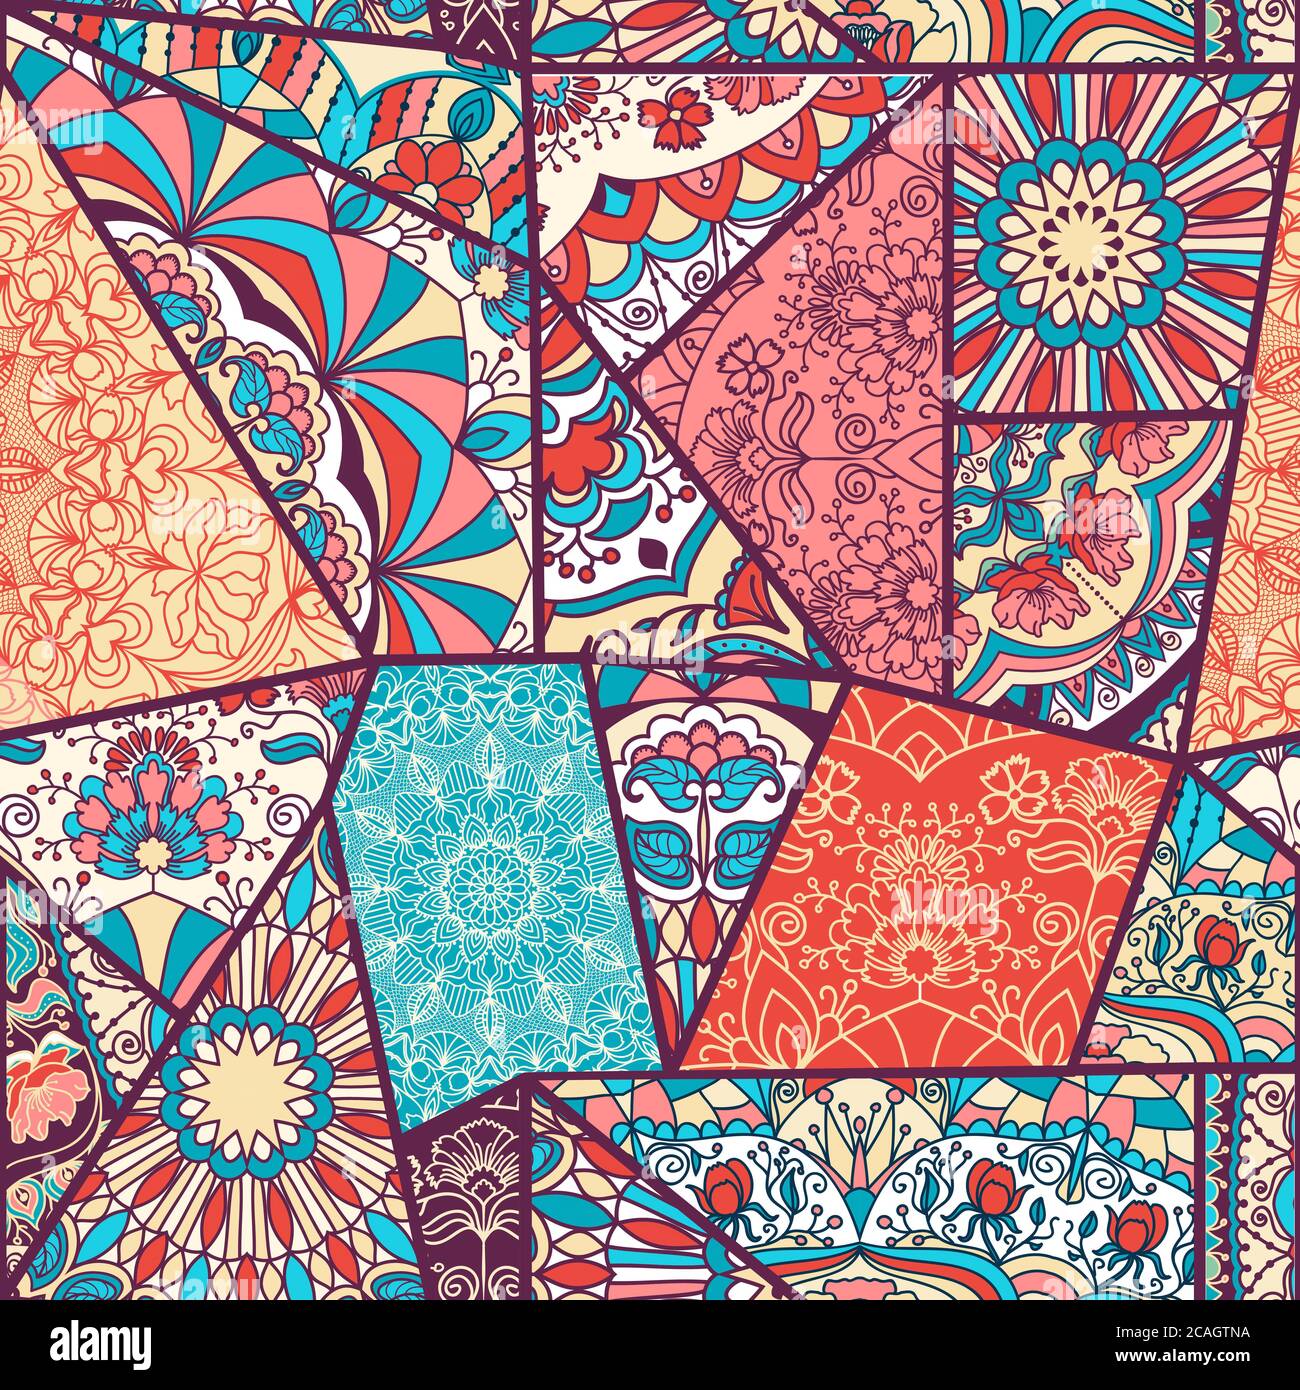 Seamless abstract colorful patchwork pattern. Vintage decorative elements. Hand drawn background in retro colors Stock Photo